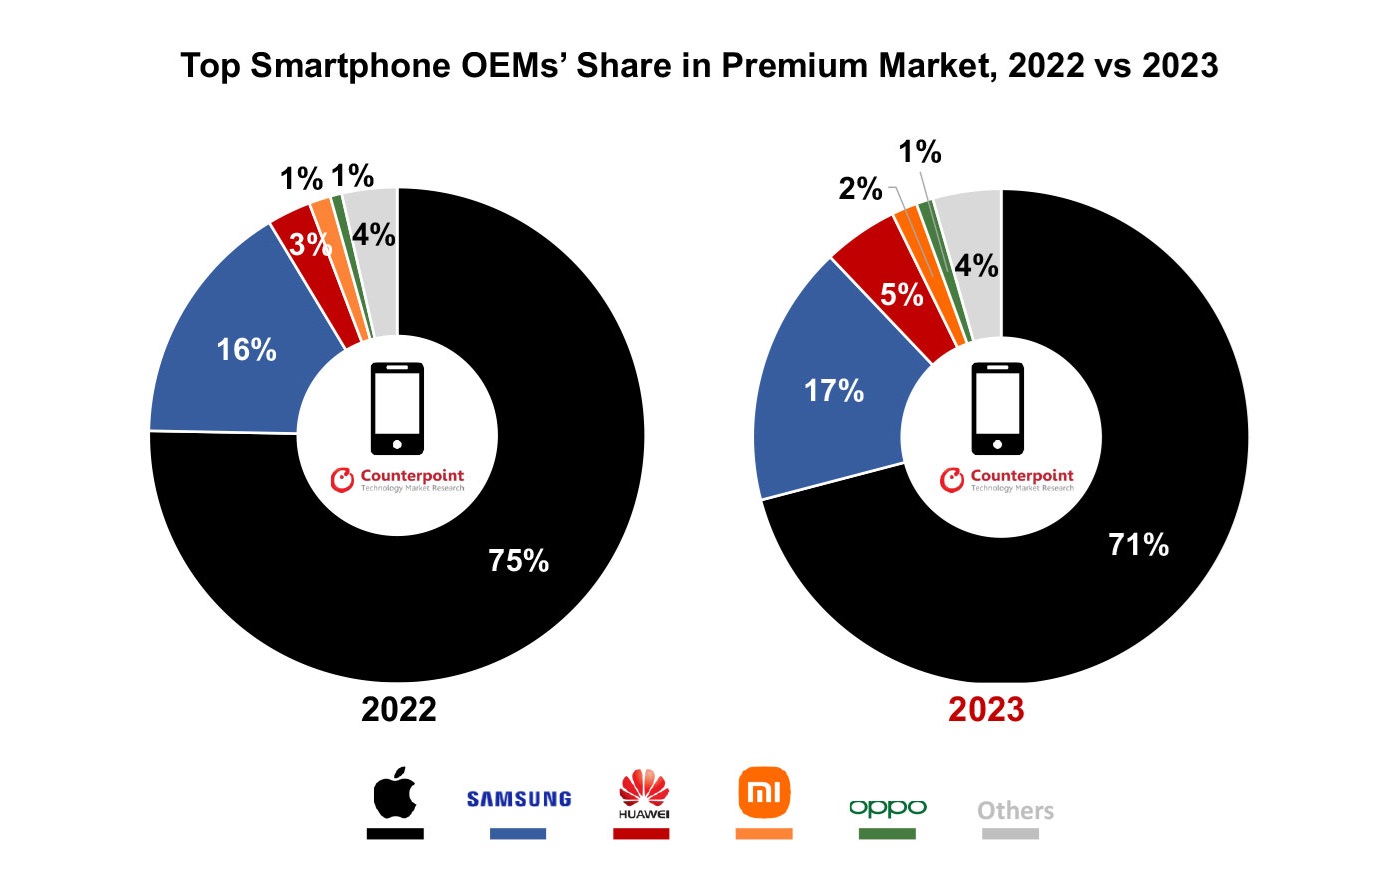 Apple's 71% share in premium smartphones dipped 4%, challenged by Samsung, Huawei, and the rise of foldable devices.